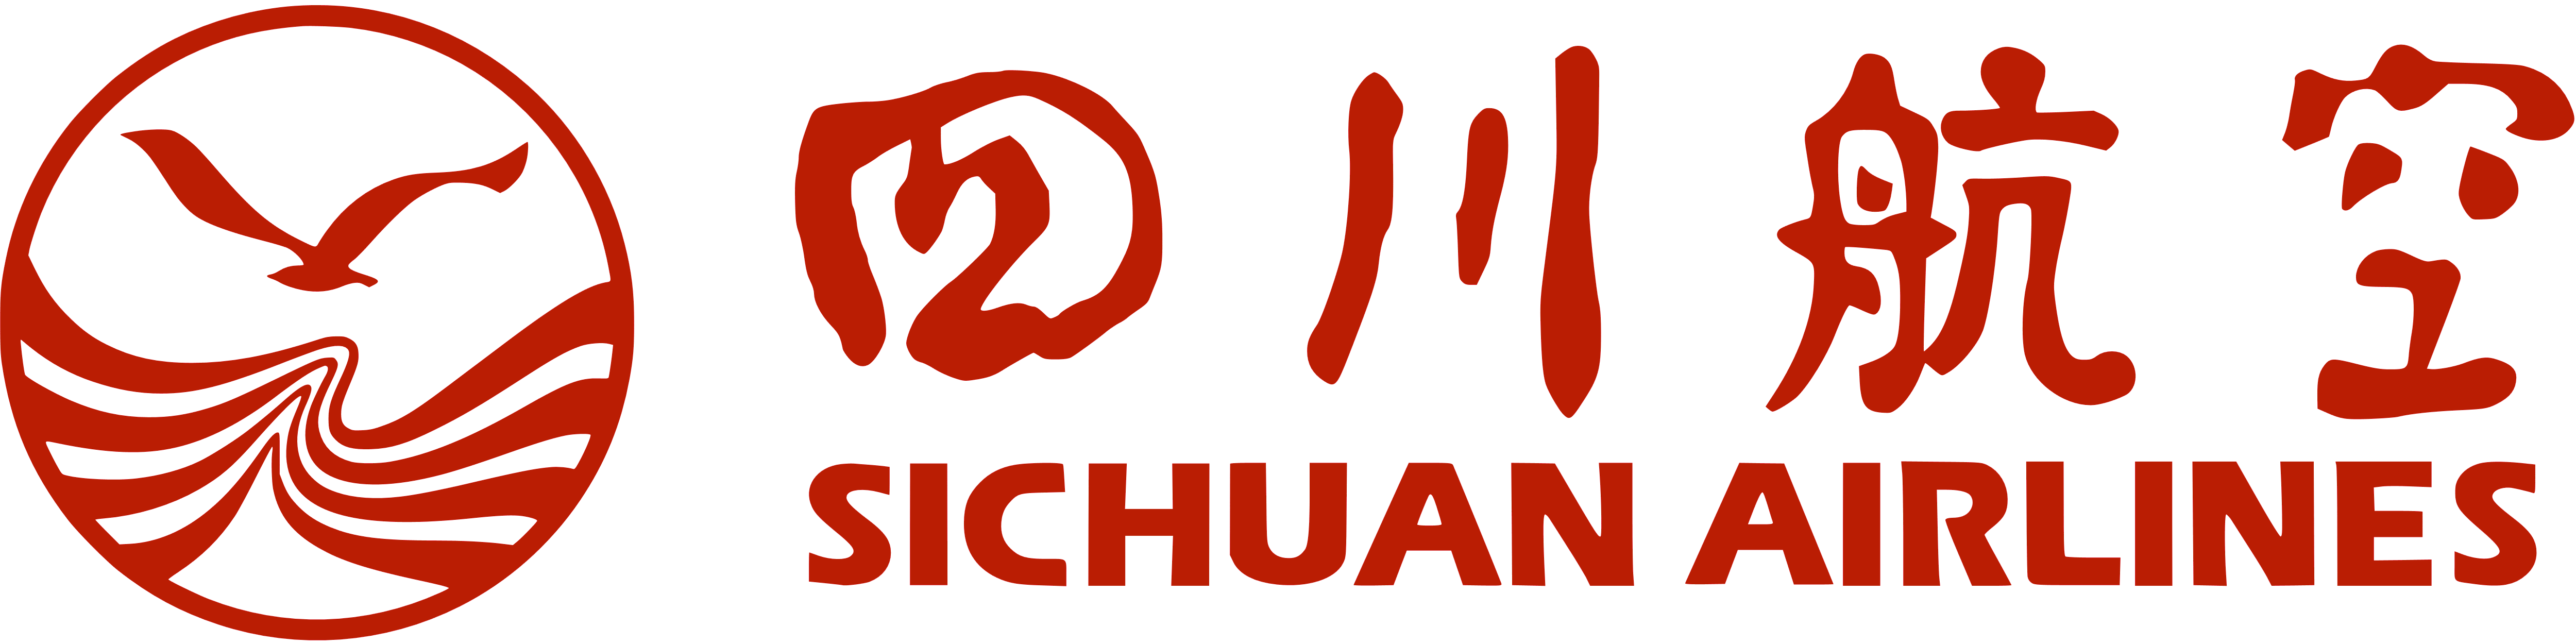 Image result for Sichuan Airlines logo